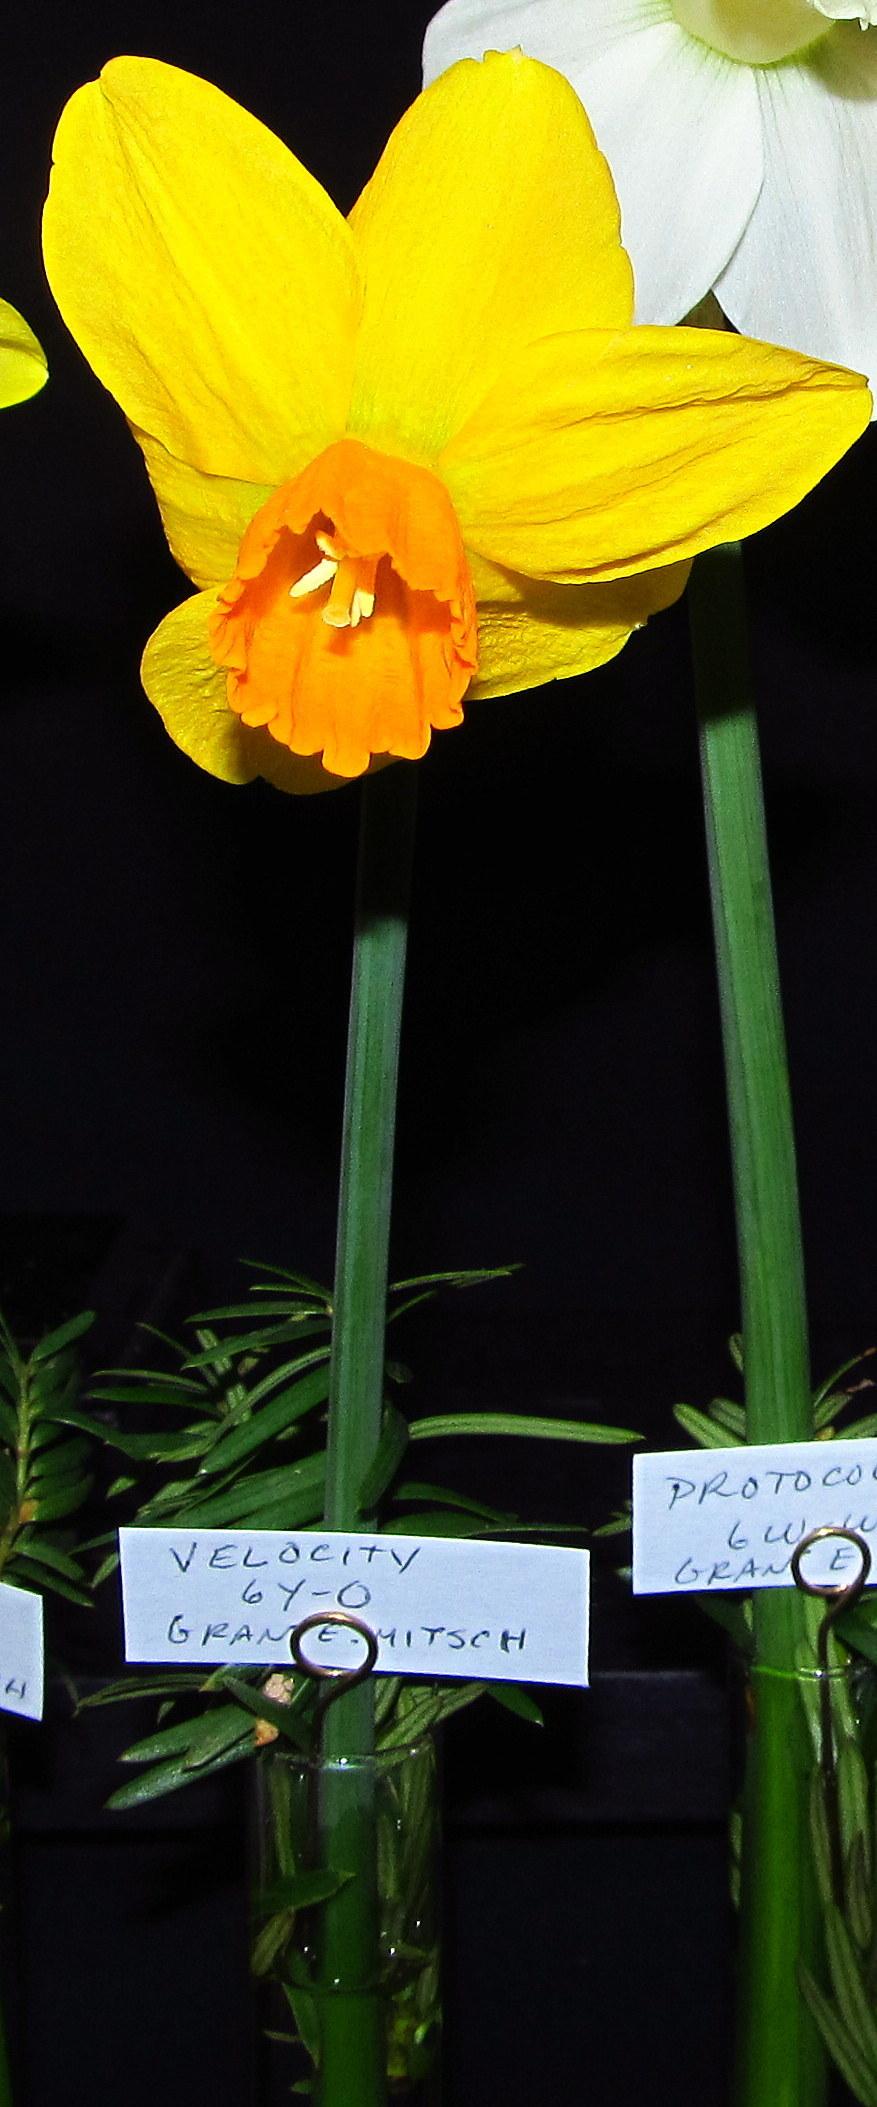 Photo of Cyclamineus Daffodil (Narcissus 'Velocity') uploaded by jmorth